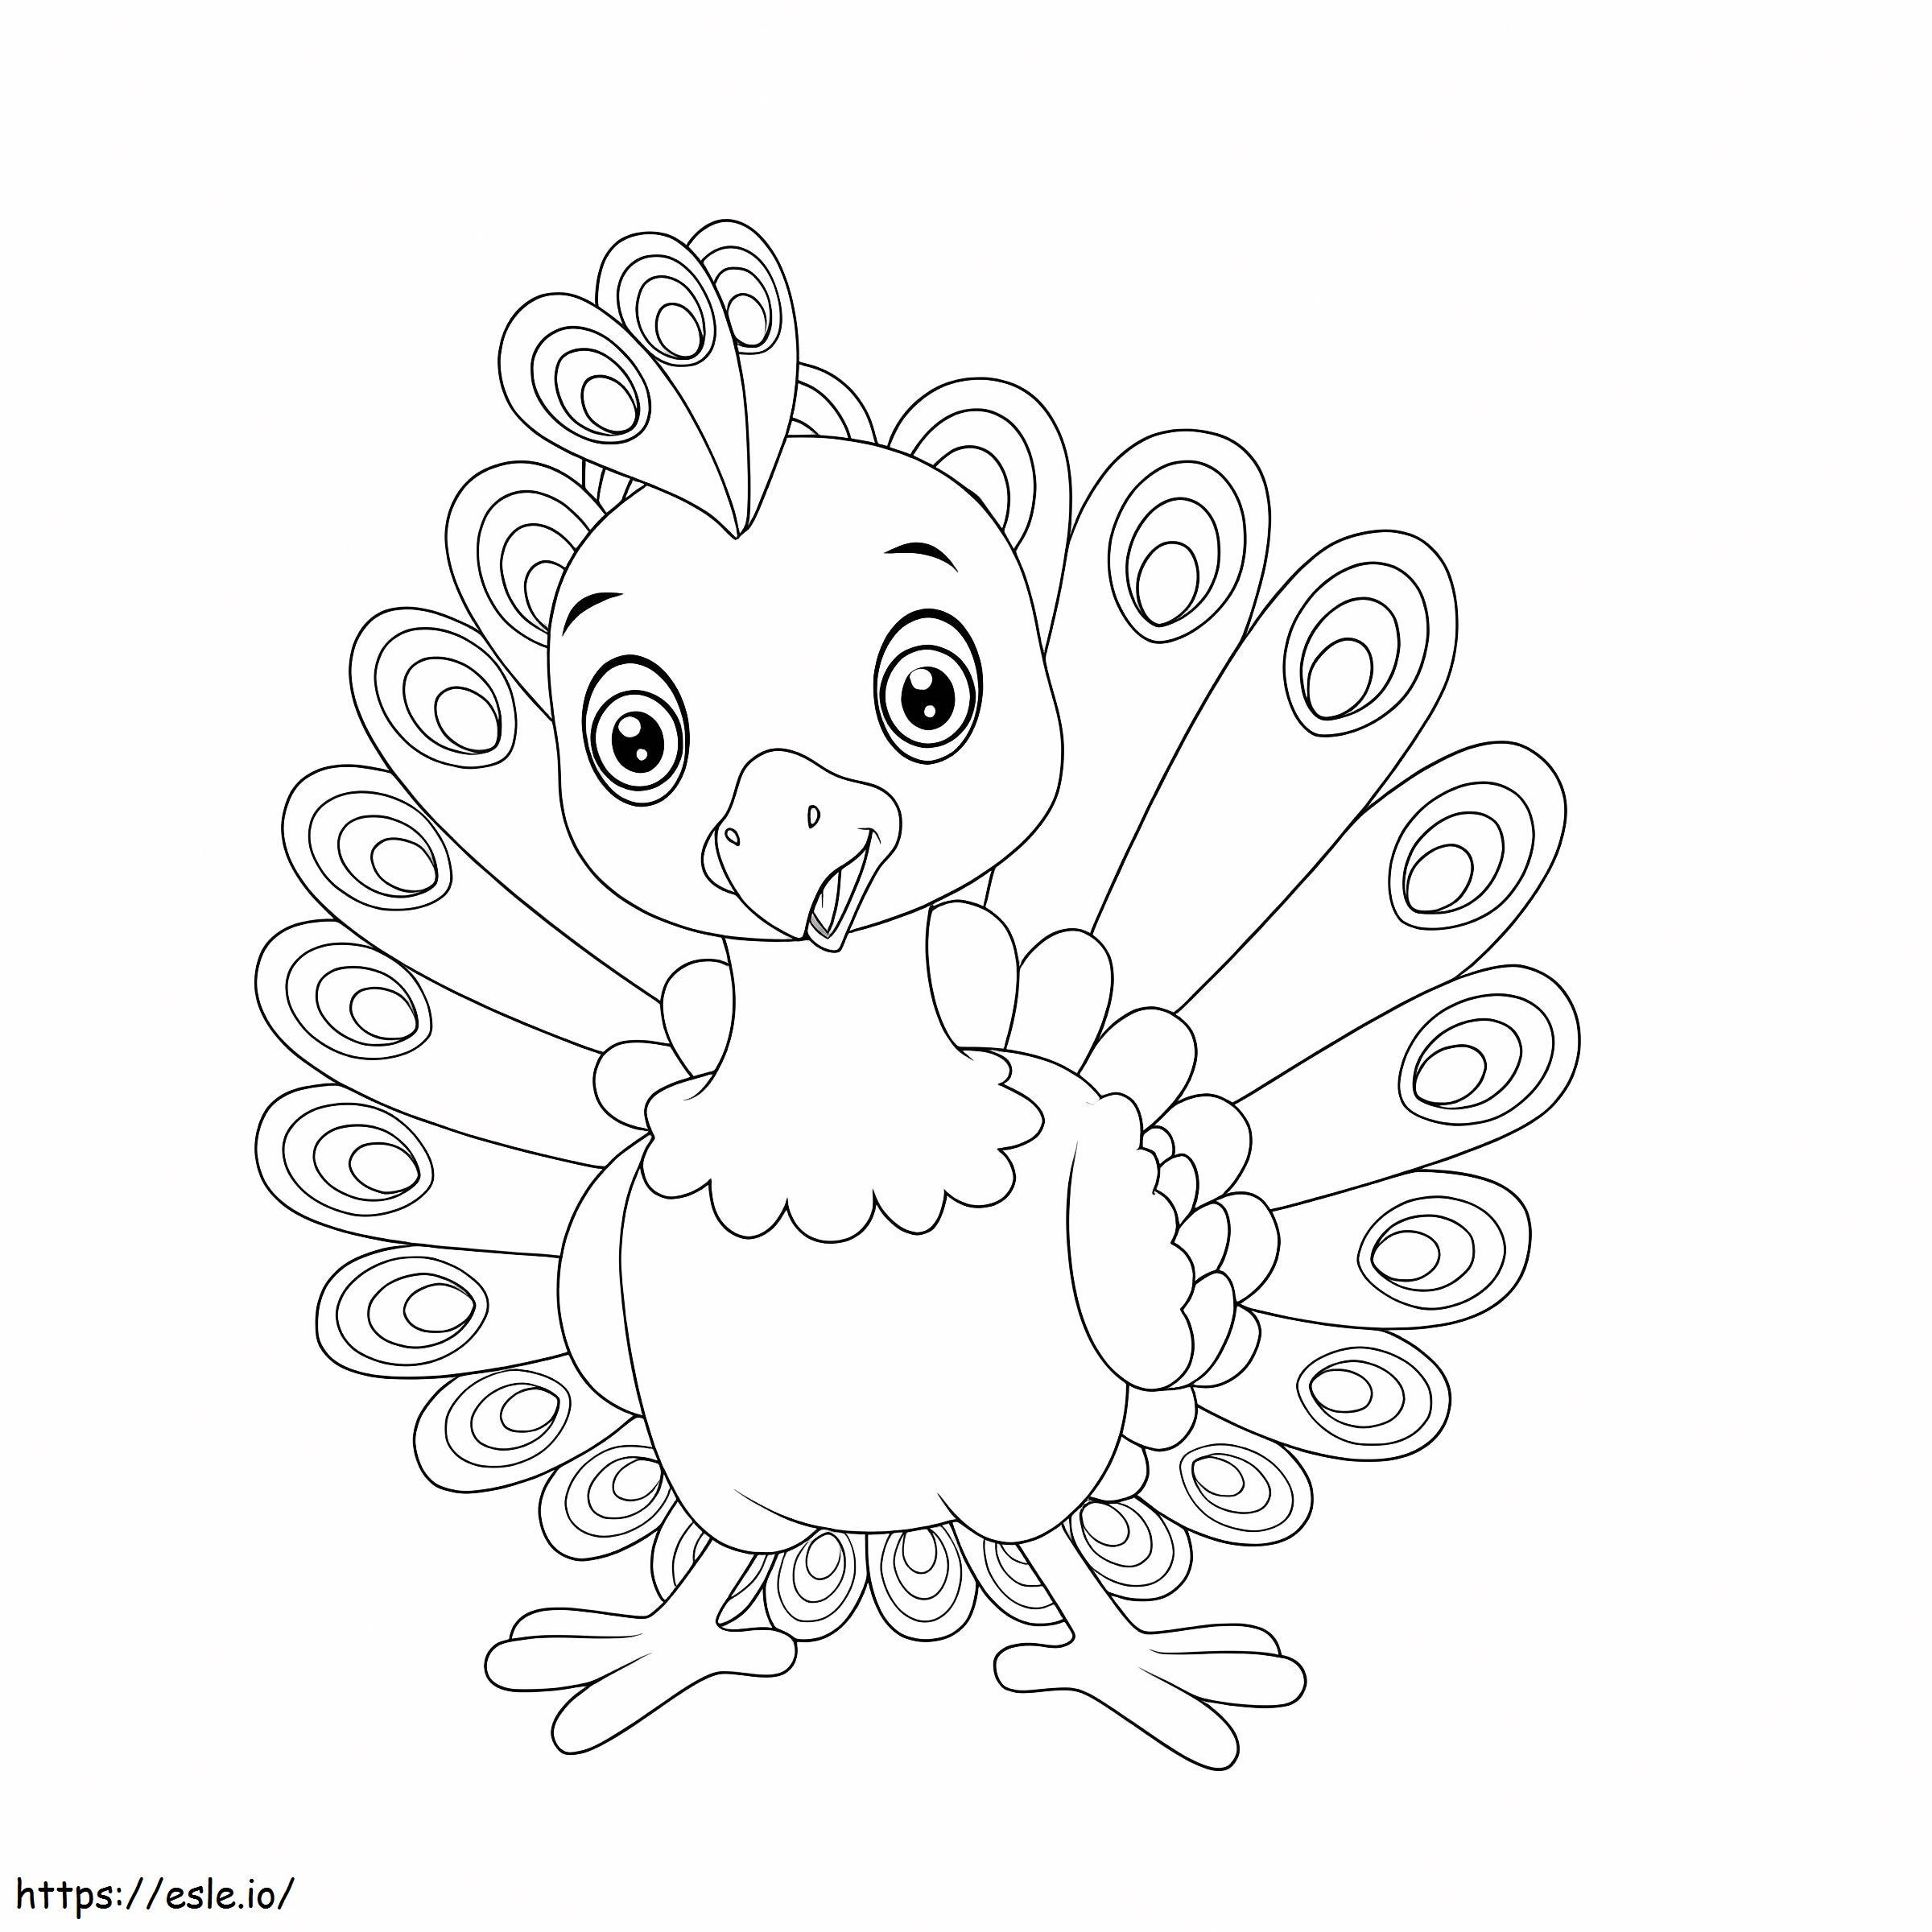 Little Peacock coloring page